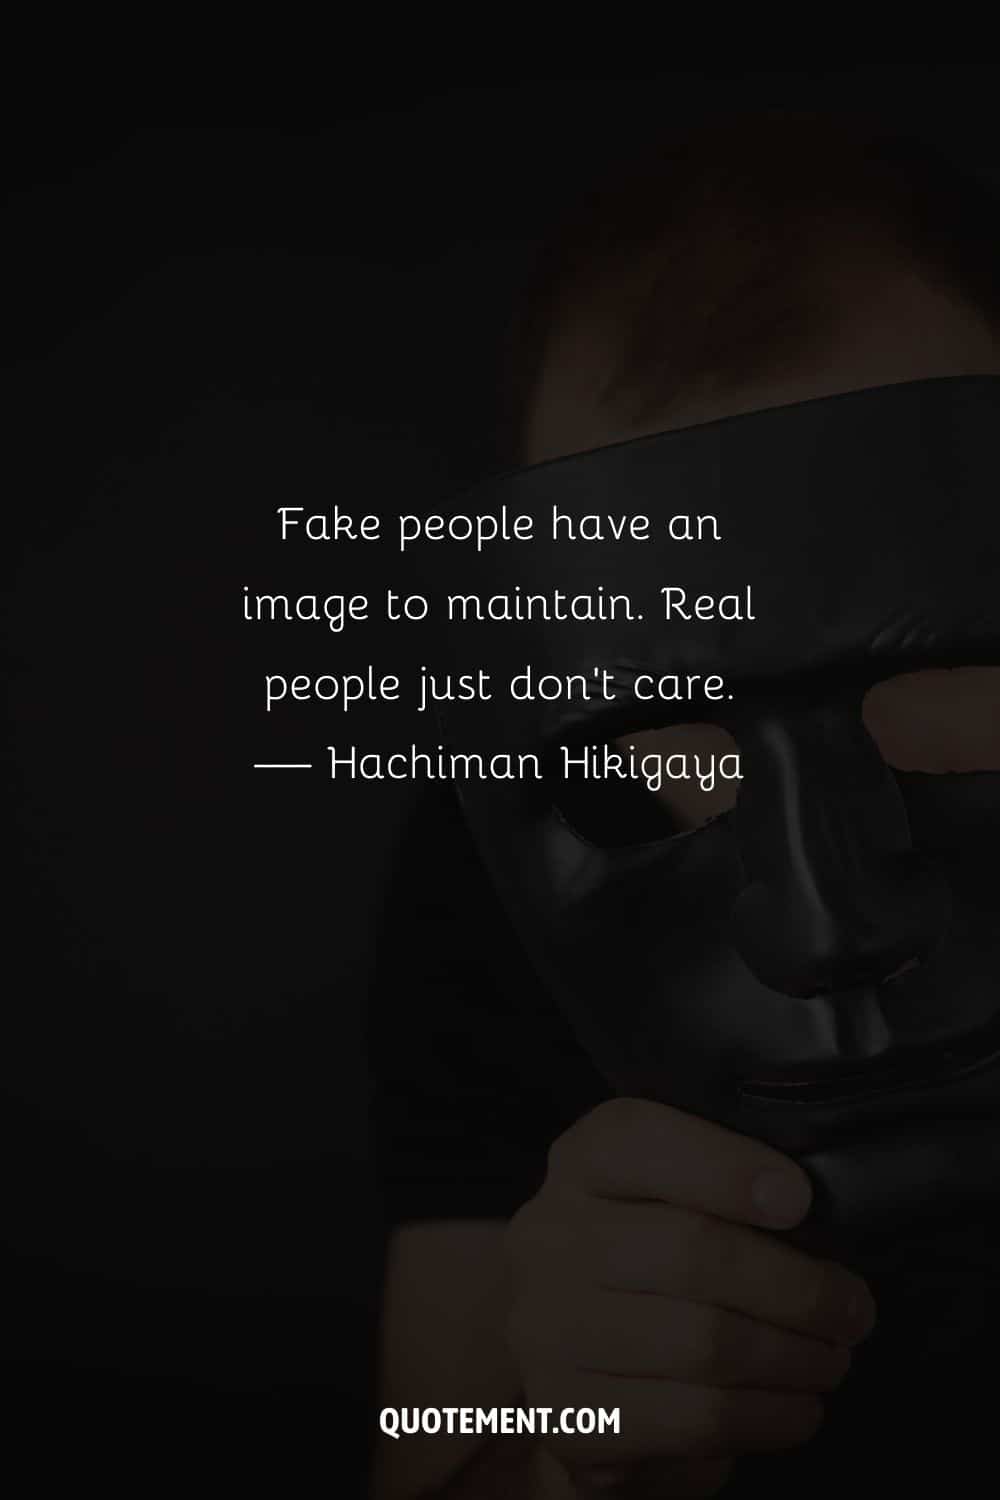 Fake people have an image to maintain